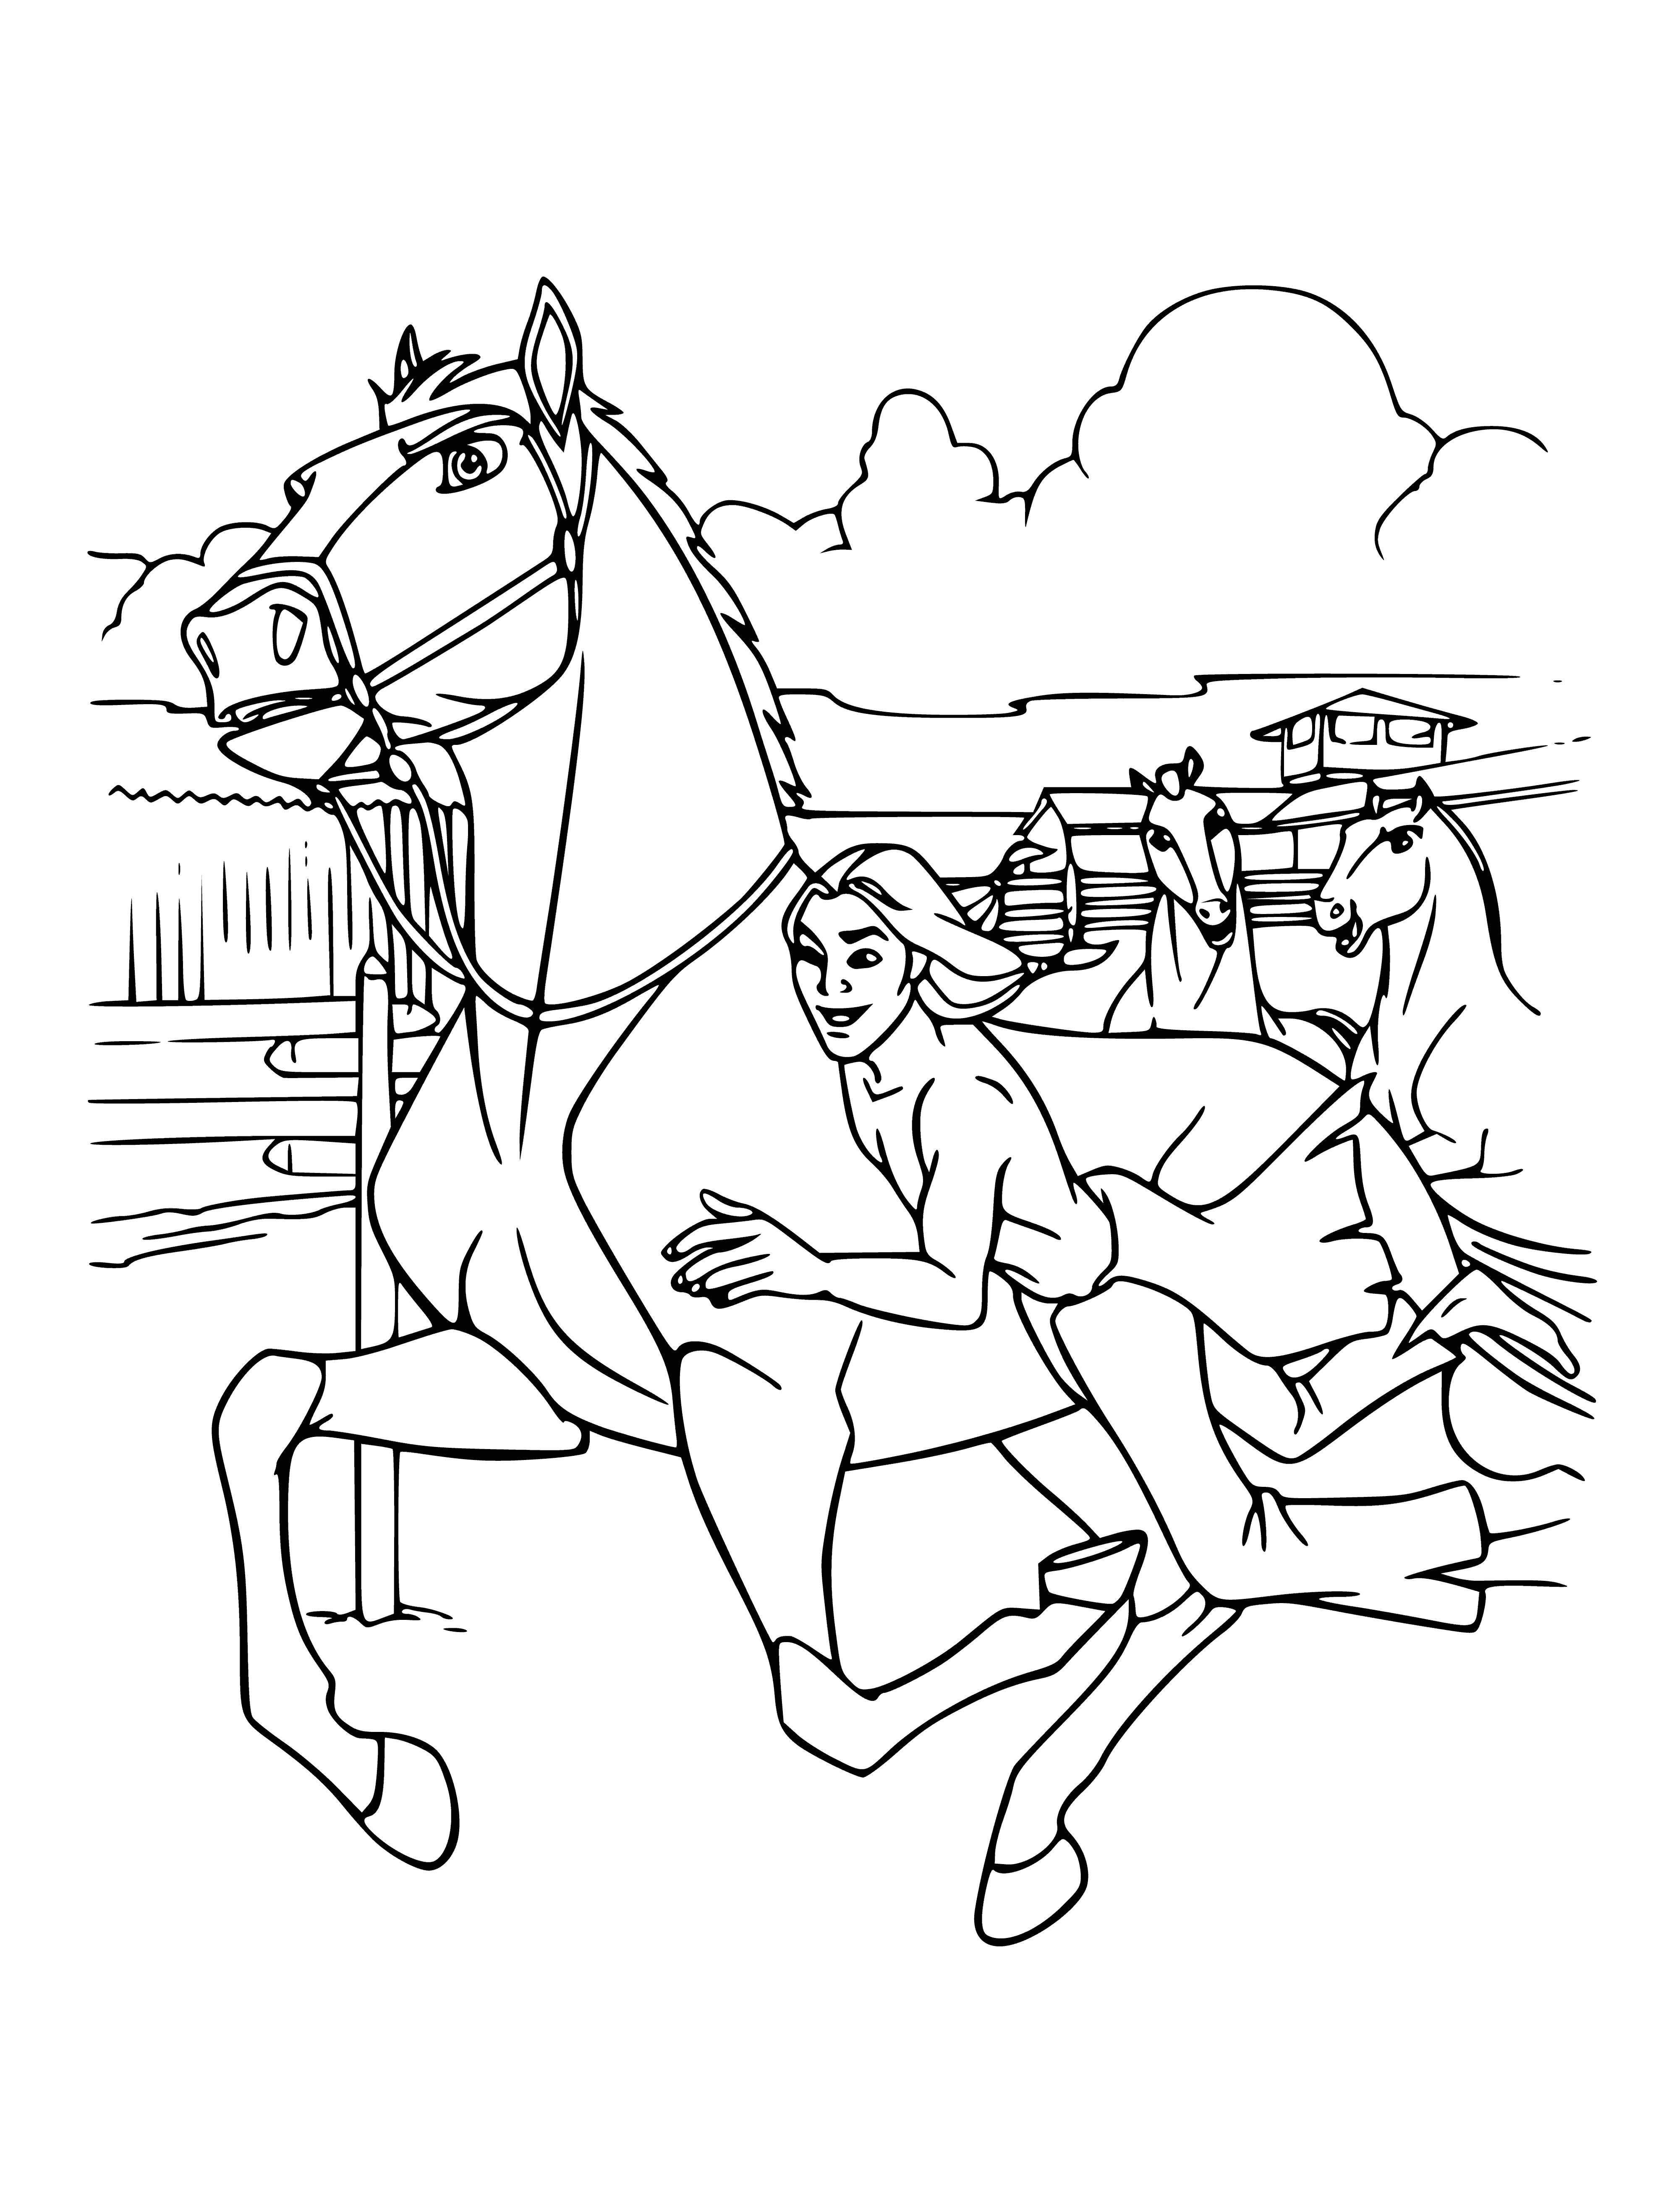 coloring page: A proud, majestic horse stands in a peaceful body of water, seemingly having overcome some great challenge.